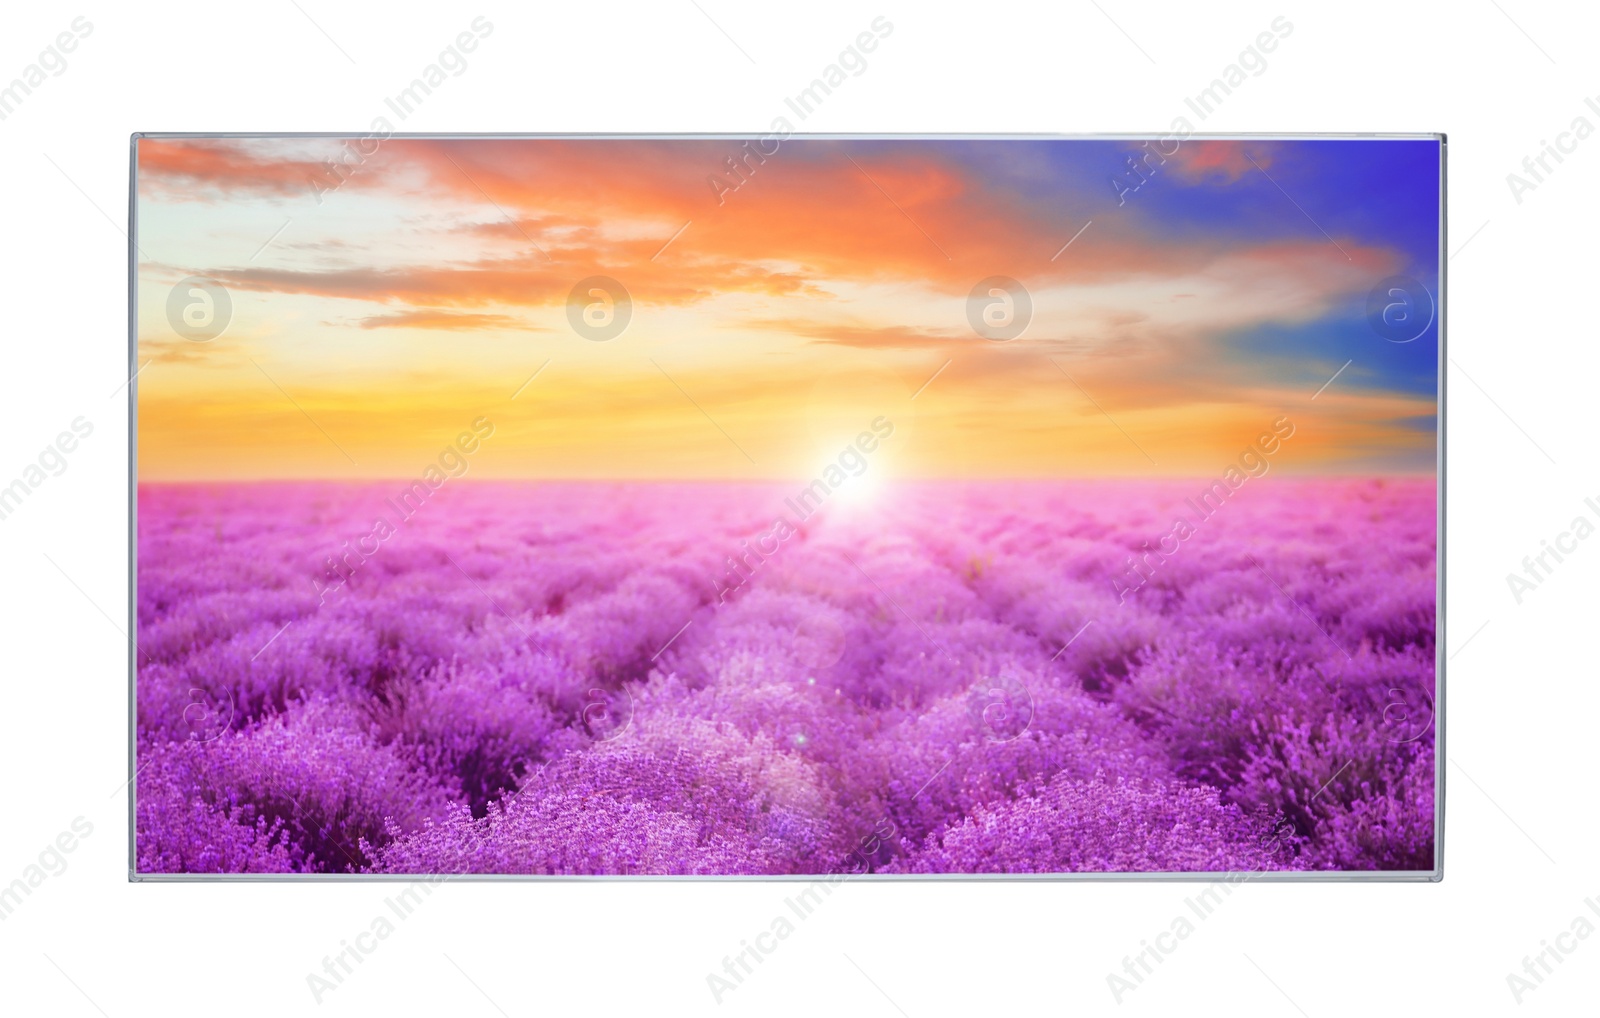 Image of Modern wide screen TV monitor showing bright lavender field, isolated on white